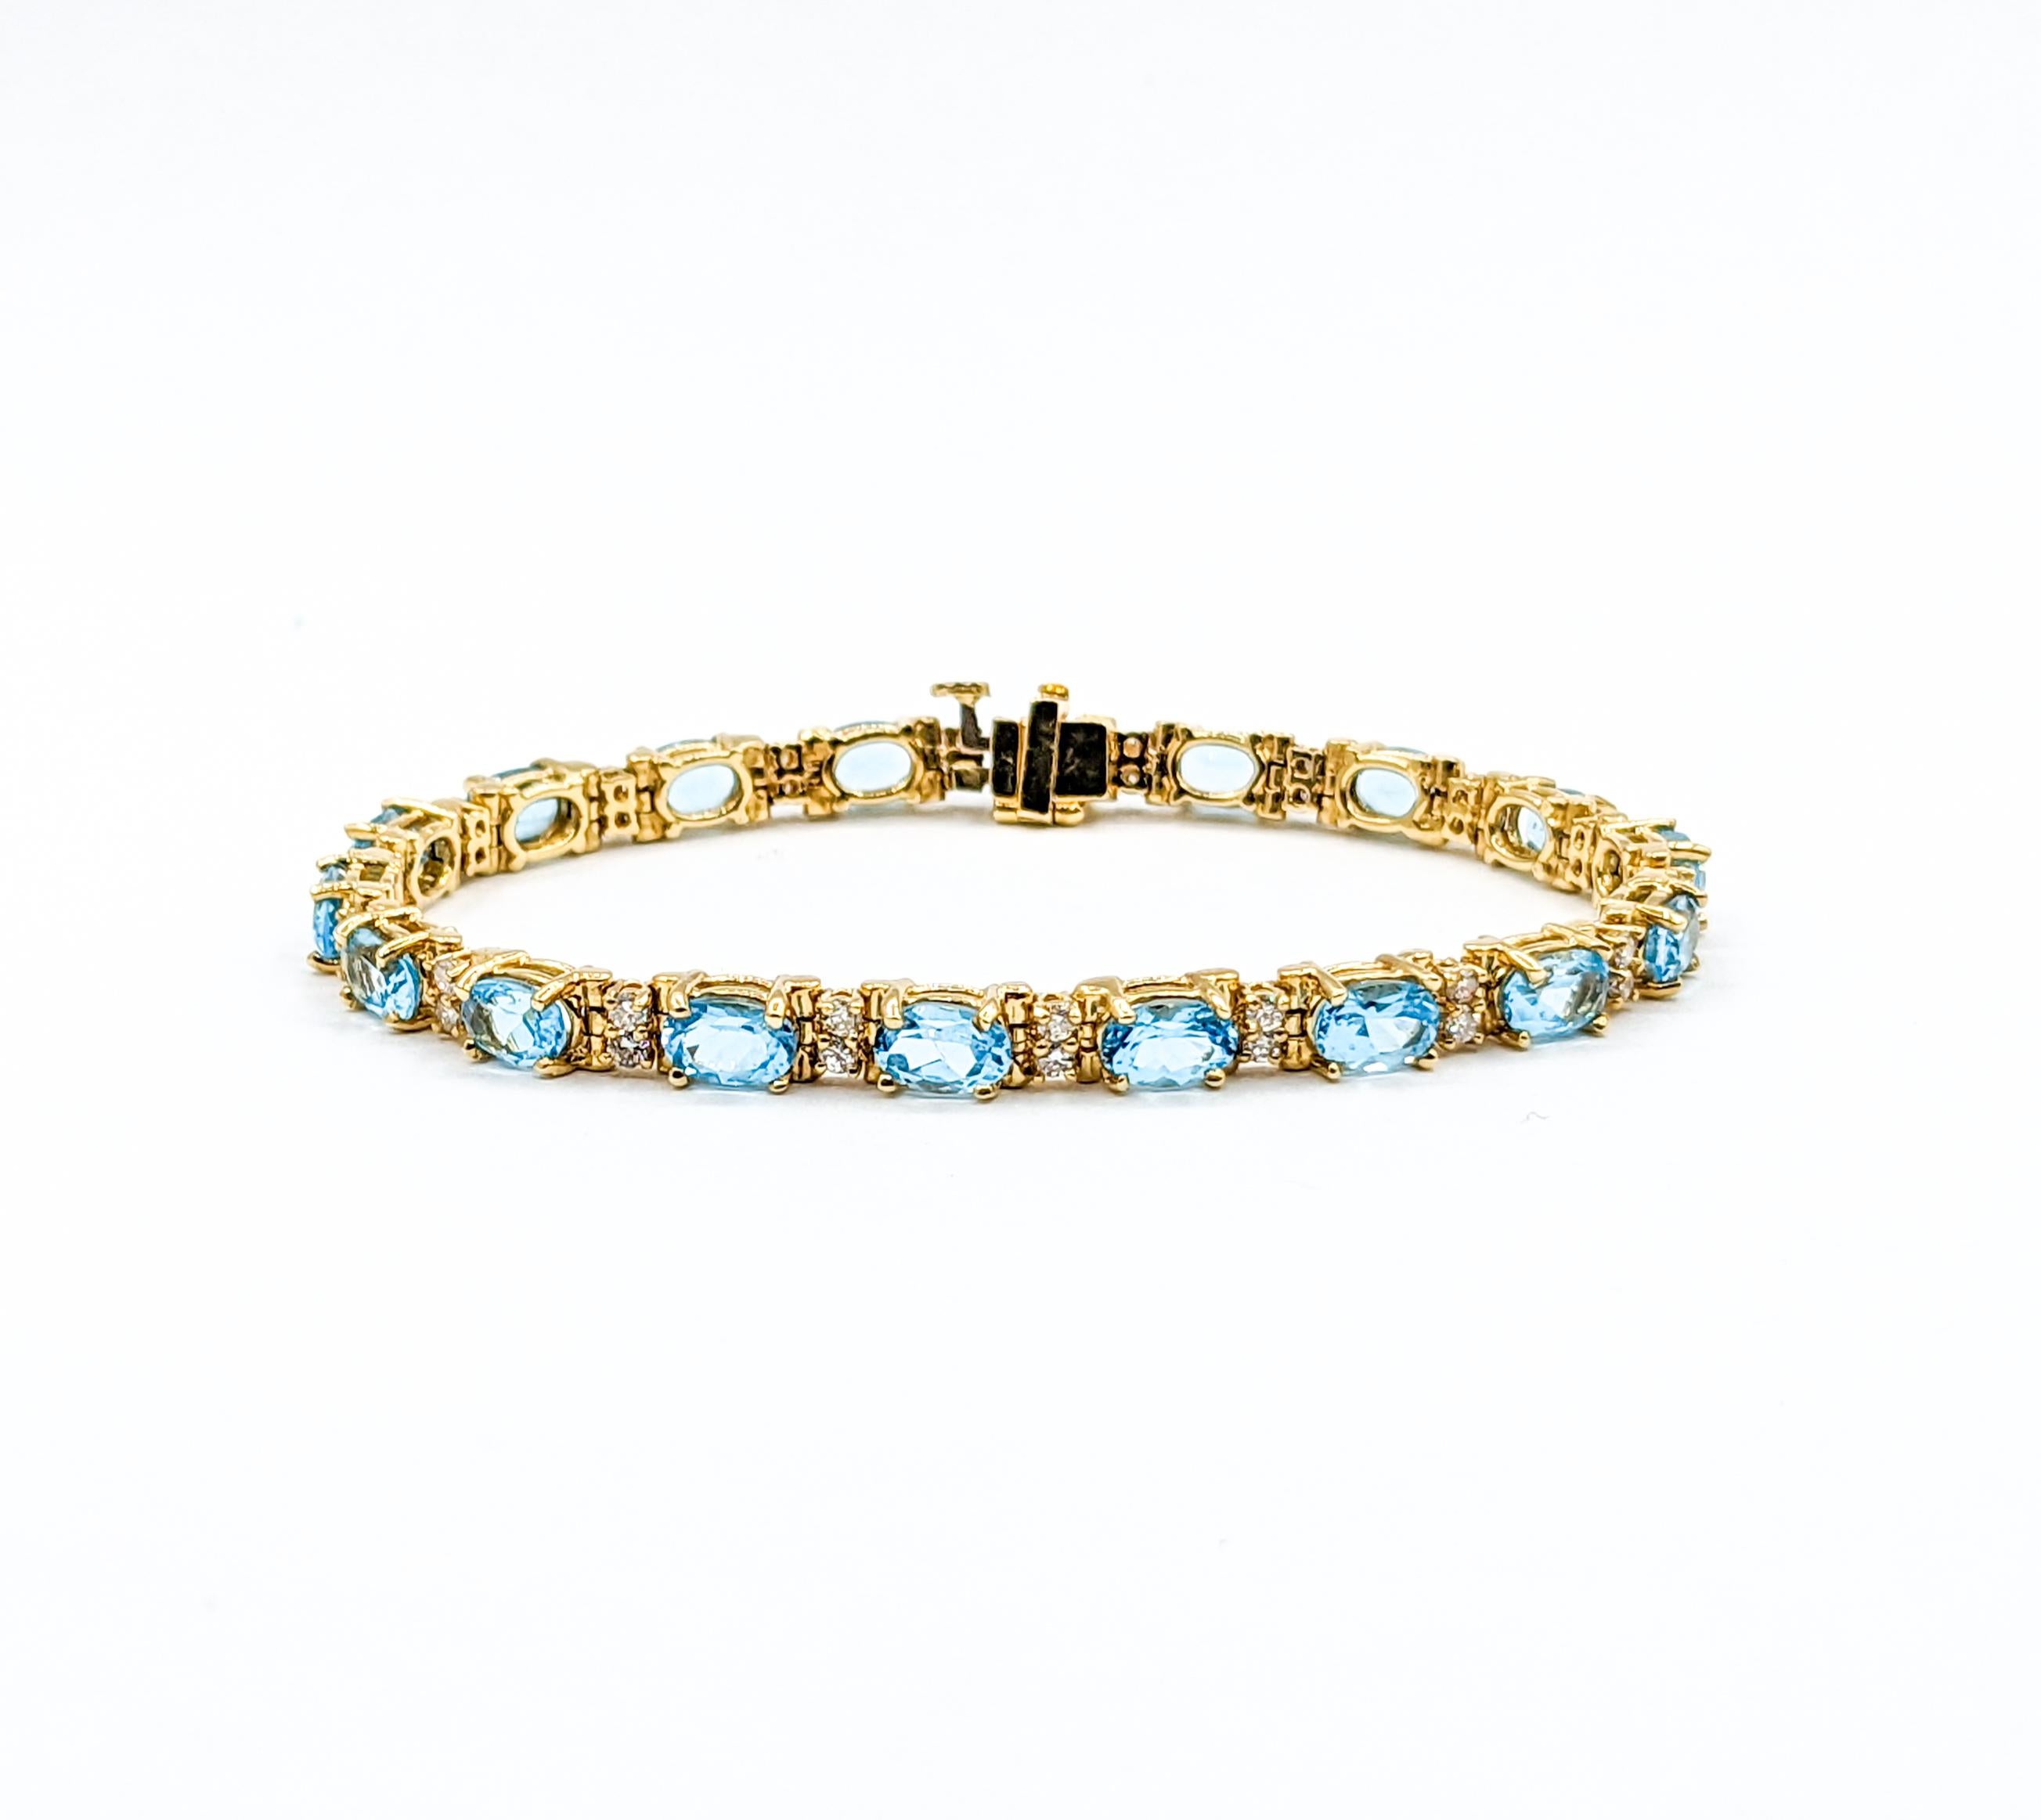 Classy Diamond & Blue Topaz Tennis Bracelet in Gold

Elevate your style with our stunning bracelet, crafted from lustrous 14k yellow gold and adorned with a mesmerizing .50ctw of round diamonds. These diamonds are I1 clarity and J-K color, providing